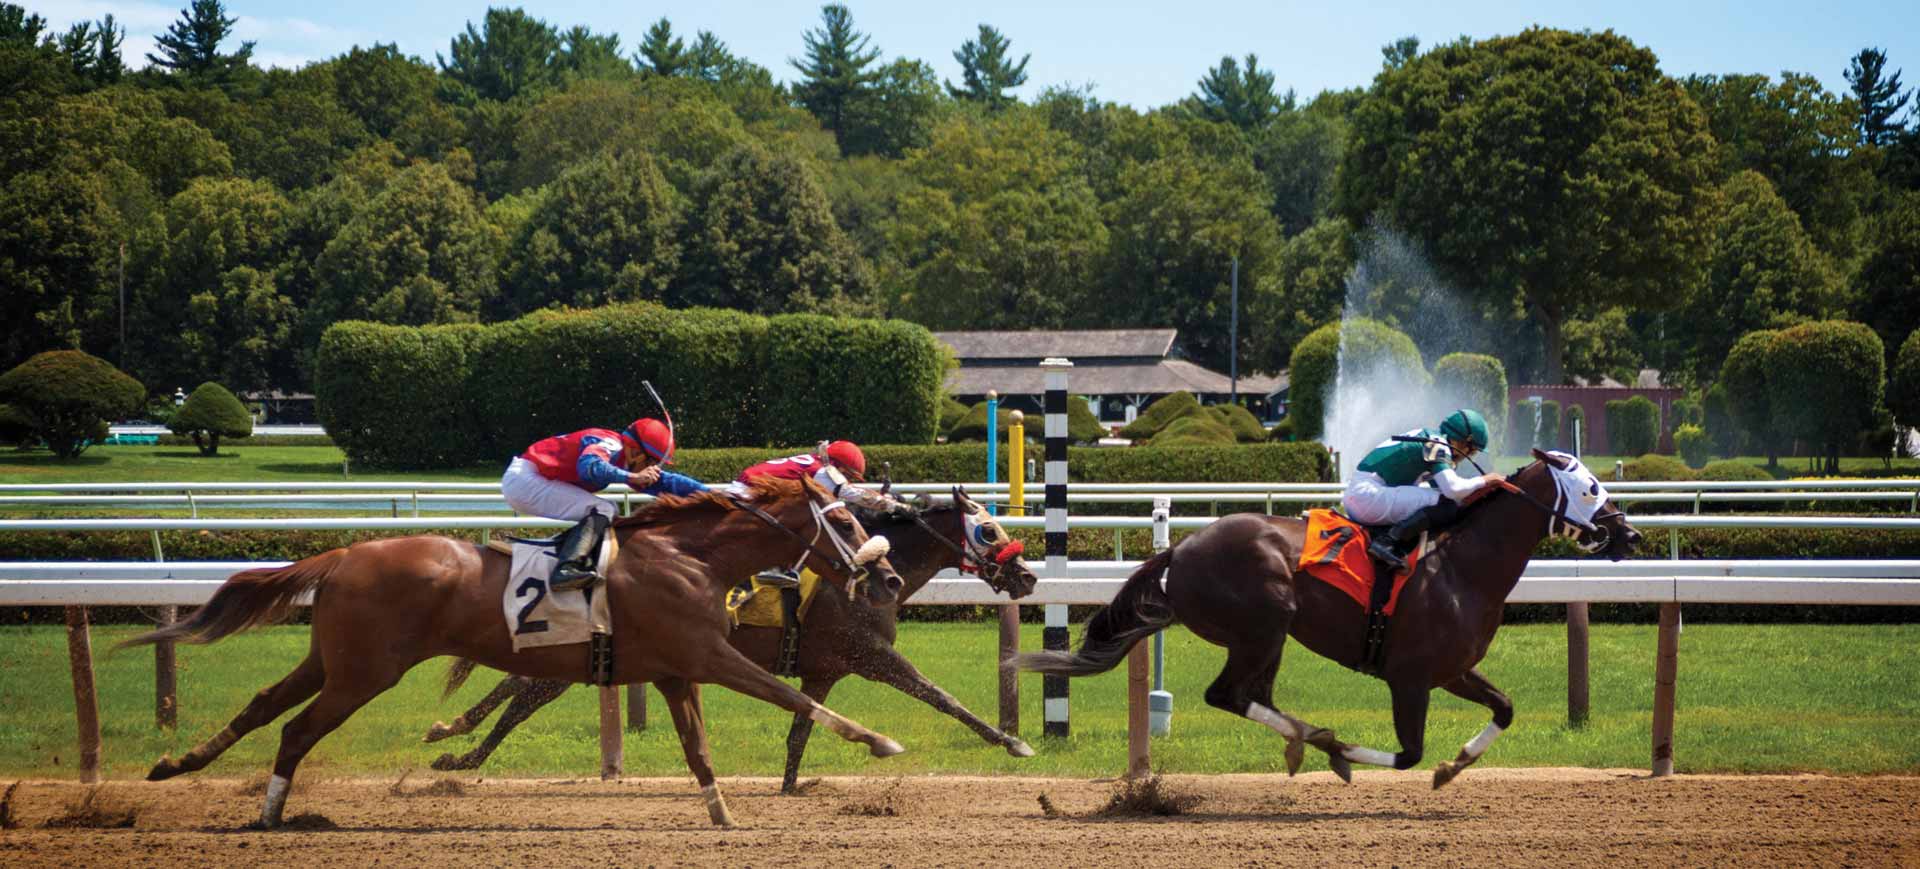 Horse racing at the Saratoga Race Course in Upstate New York